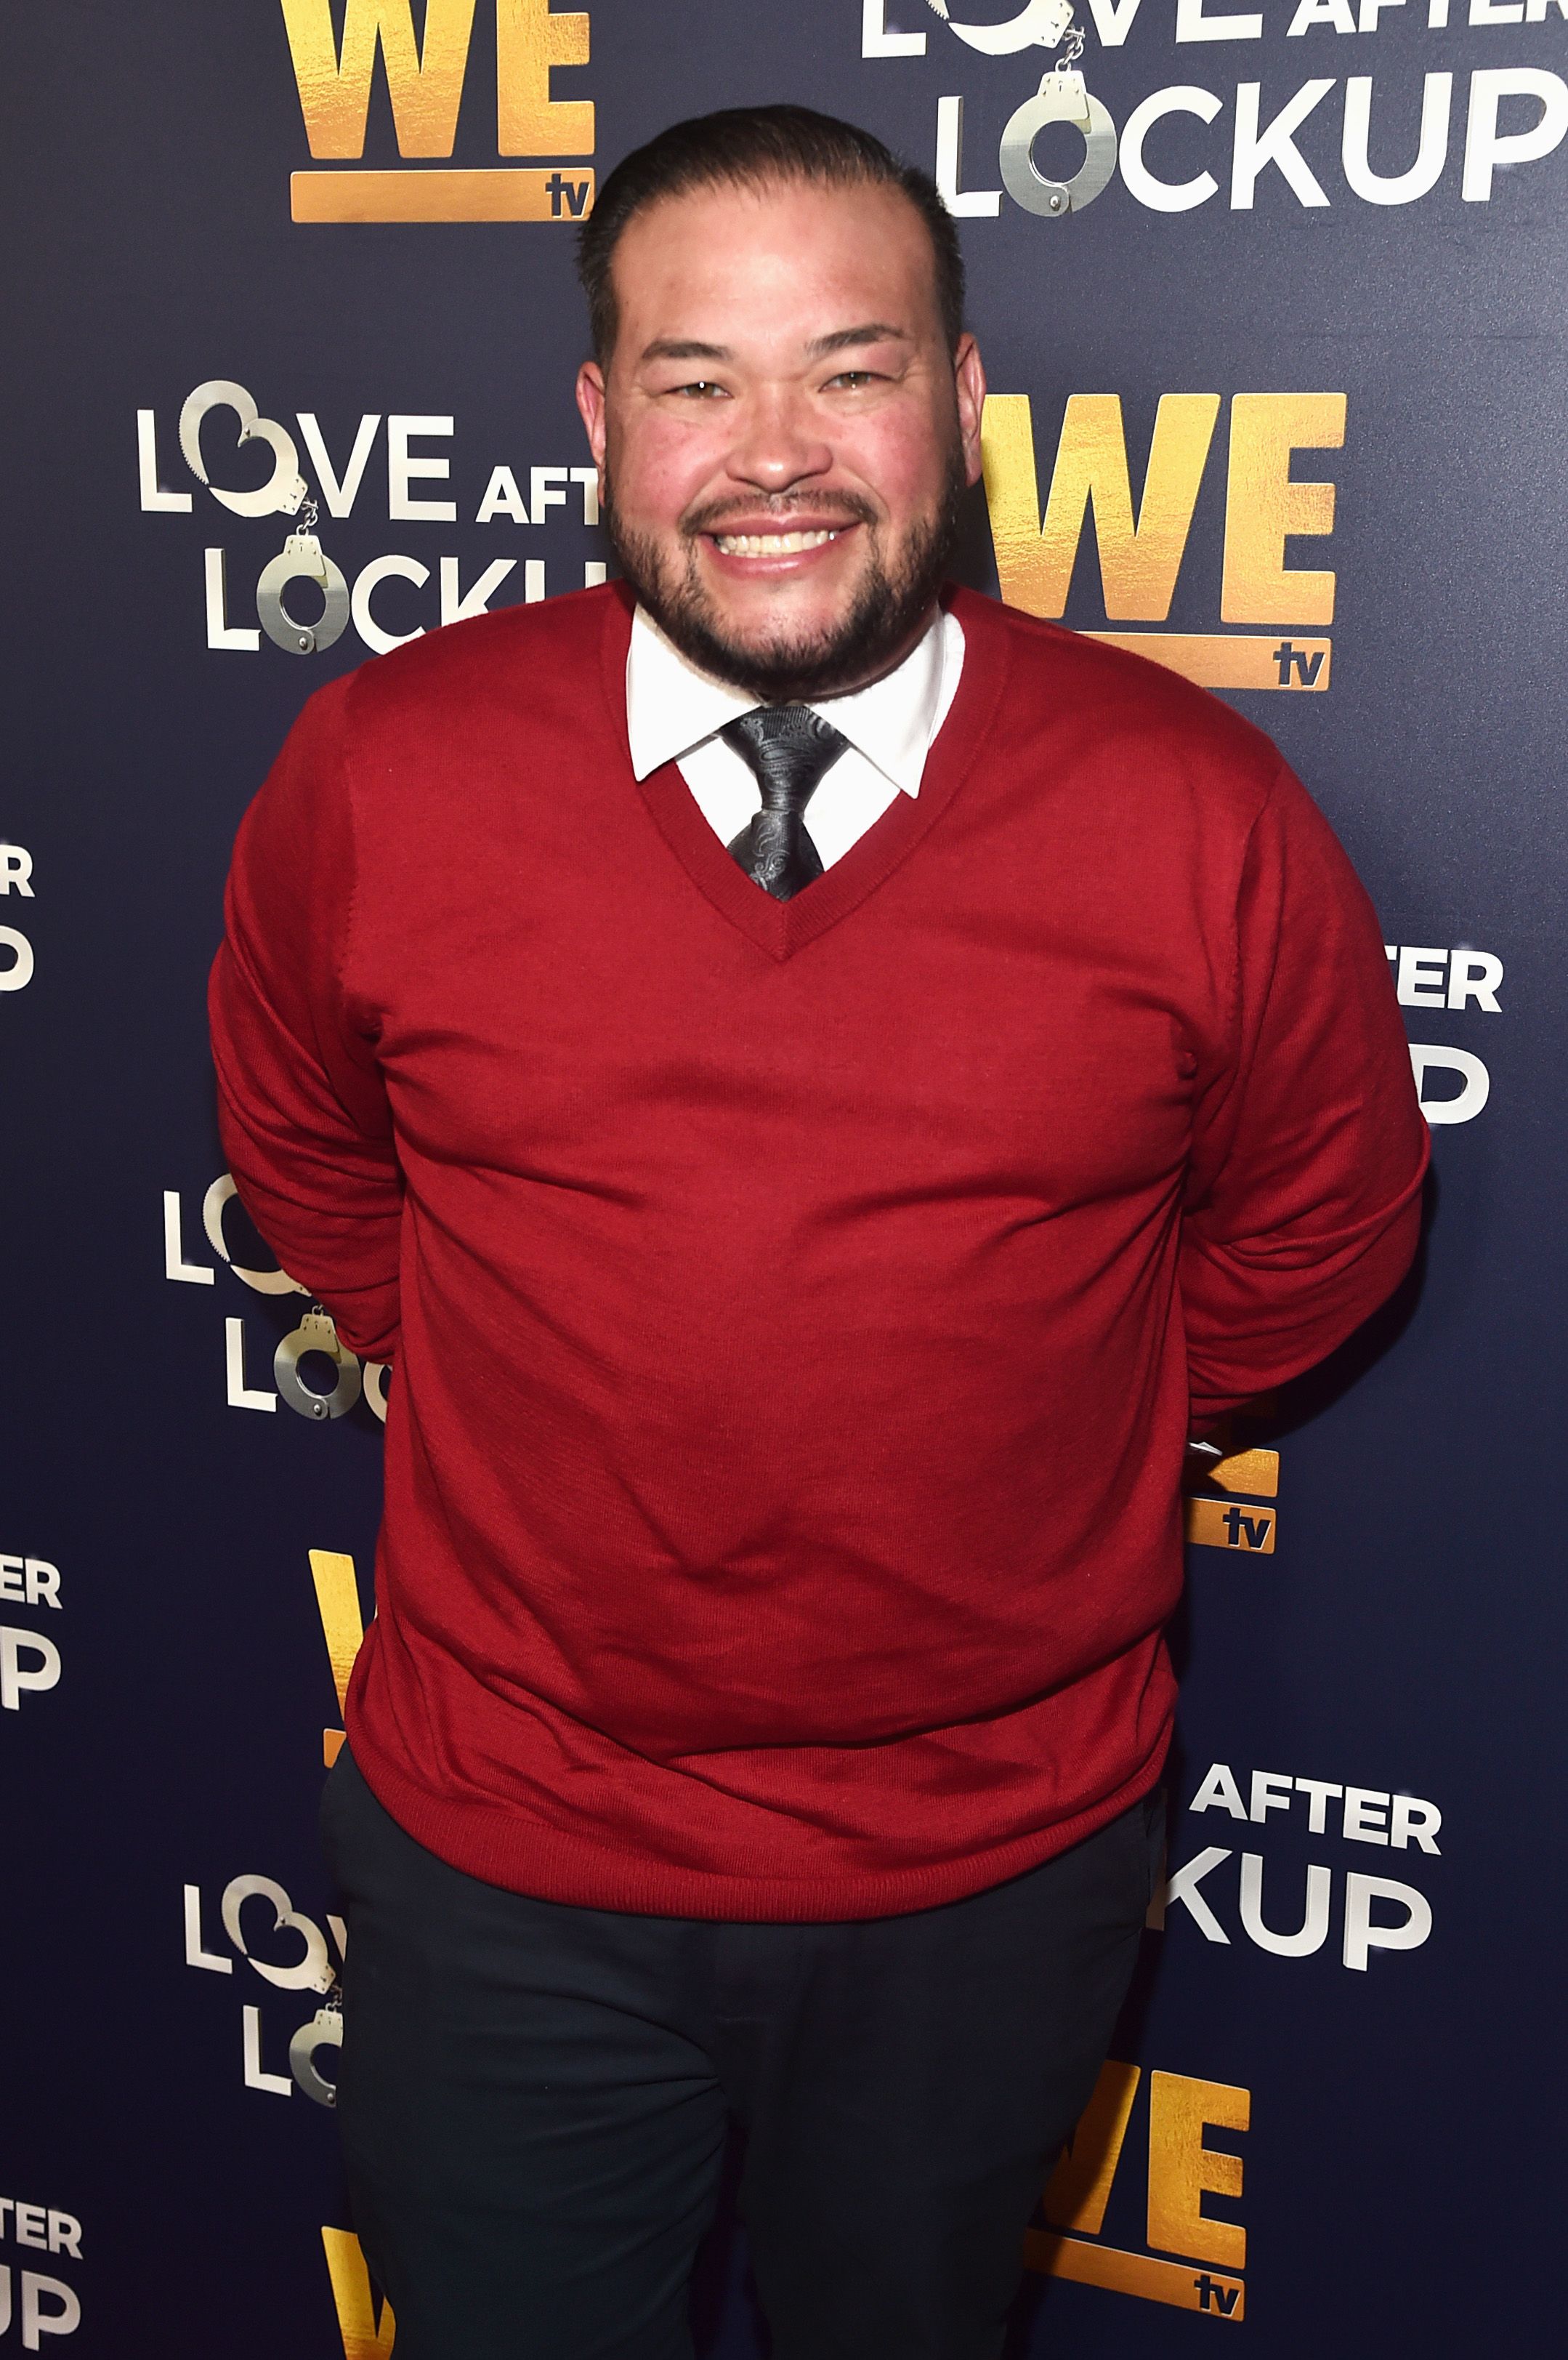 Jon Gosselin at WE TV on December 11, 2018, in Beverly Hills, California. | Photo: Getty Images